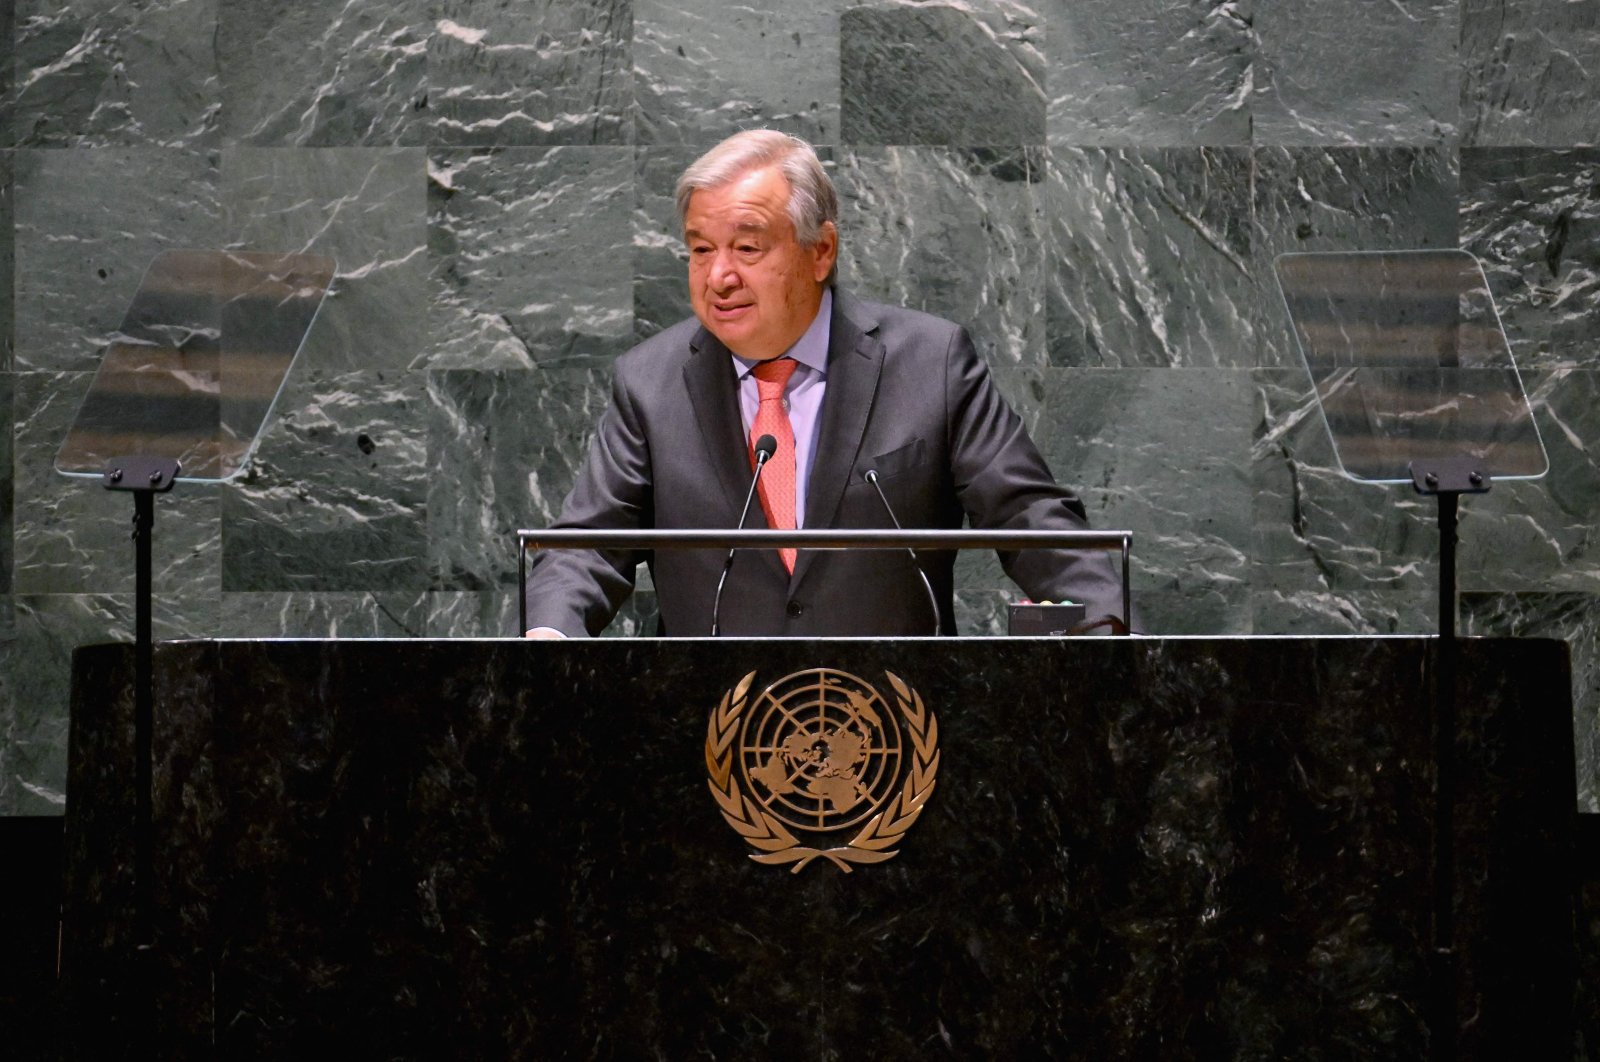 U.N. Secretary-General Antonio Guterres speaks during the 2022 Review Conference of the Parties to the Treaty on the Non-Proliferation of Nuclear Weapons at the United Nations in New York City, U.S., Aug. 1, 2022. (AFP Photo)